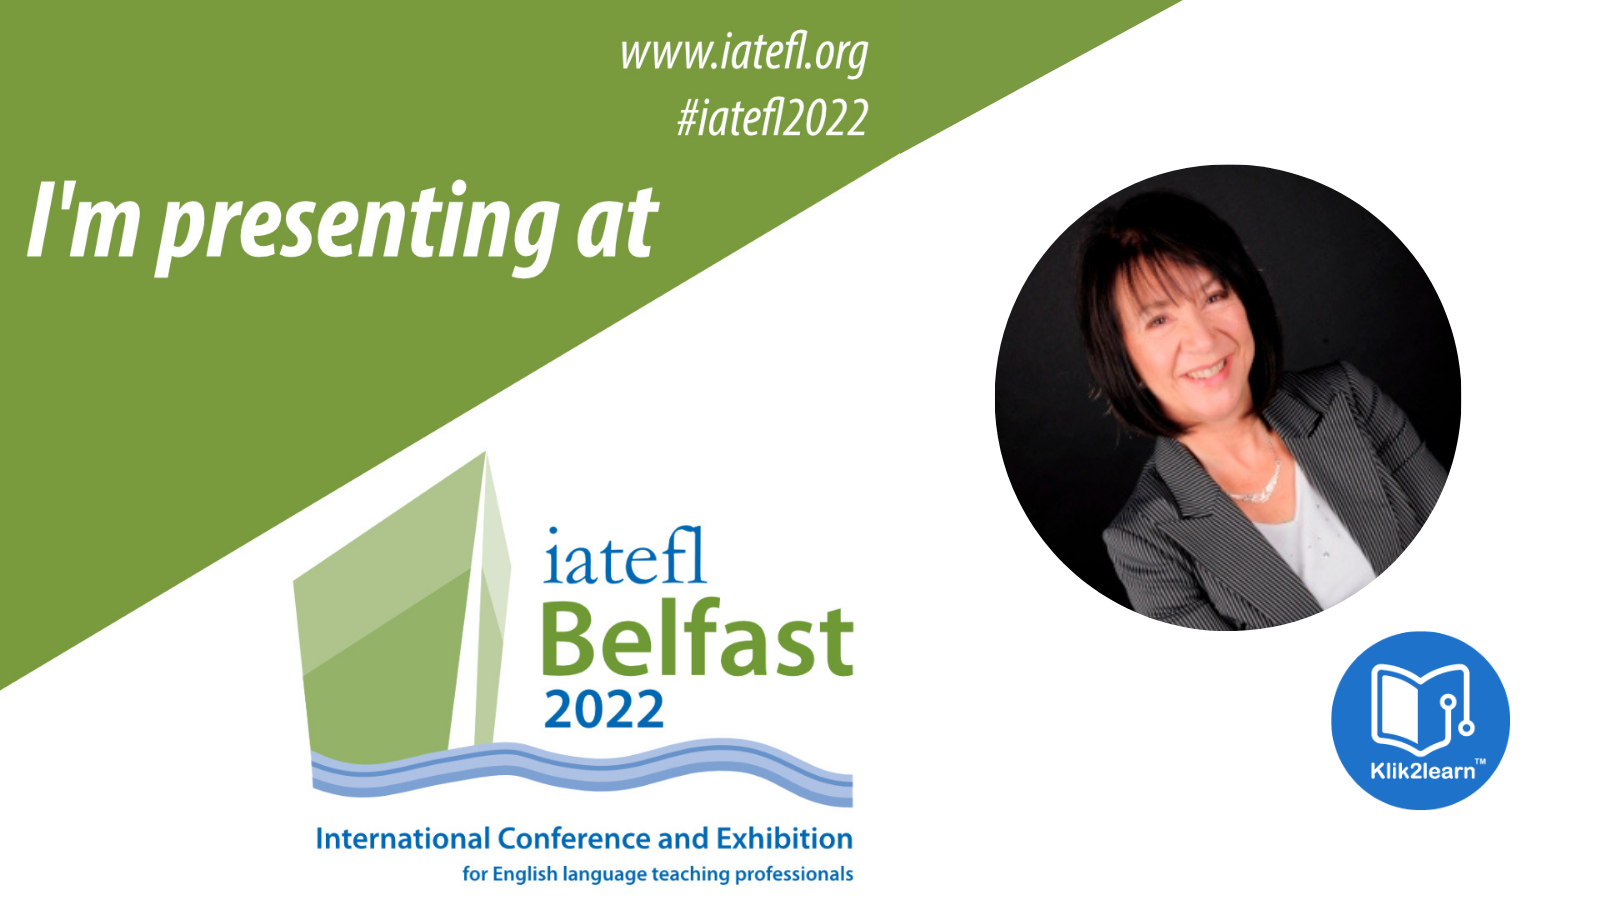 IATEFL International Conference and Exhibition 2022